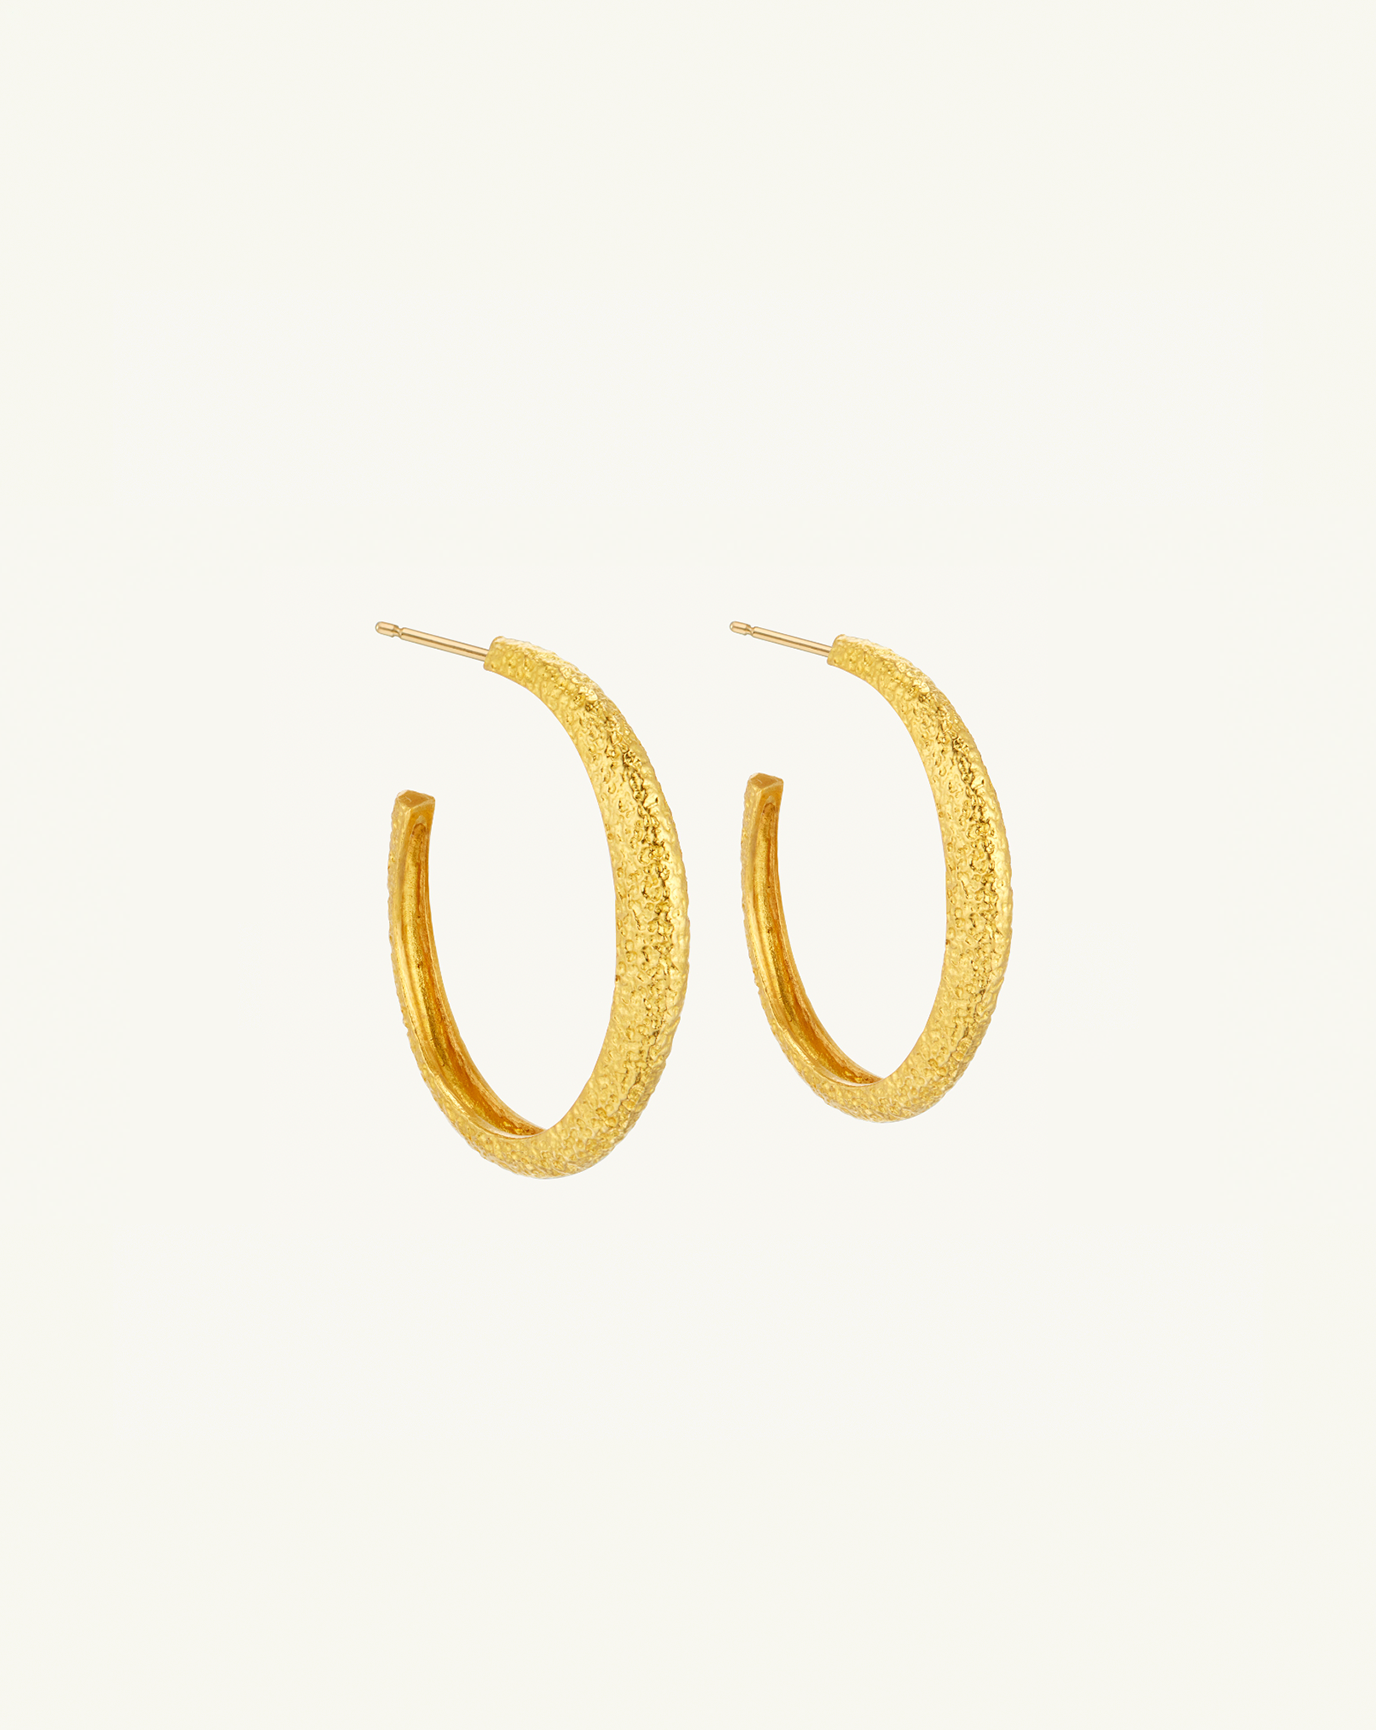 Product image of the large asymmetric hoops with textured gold